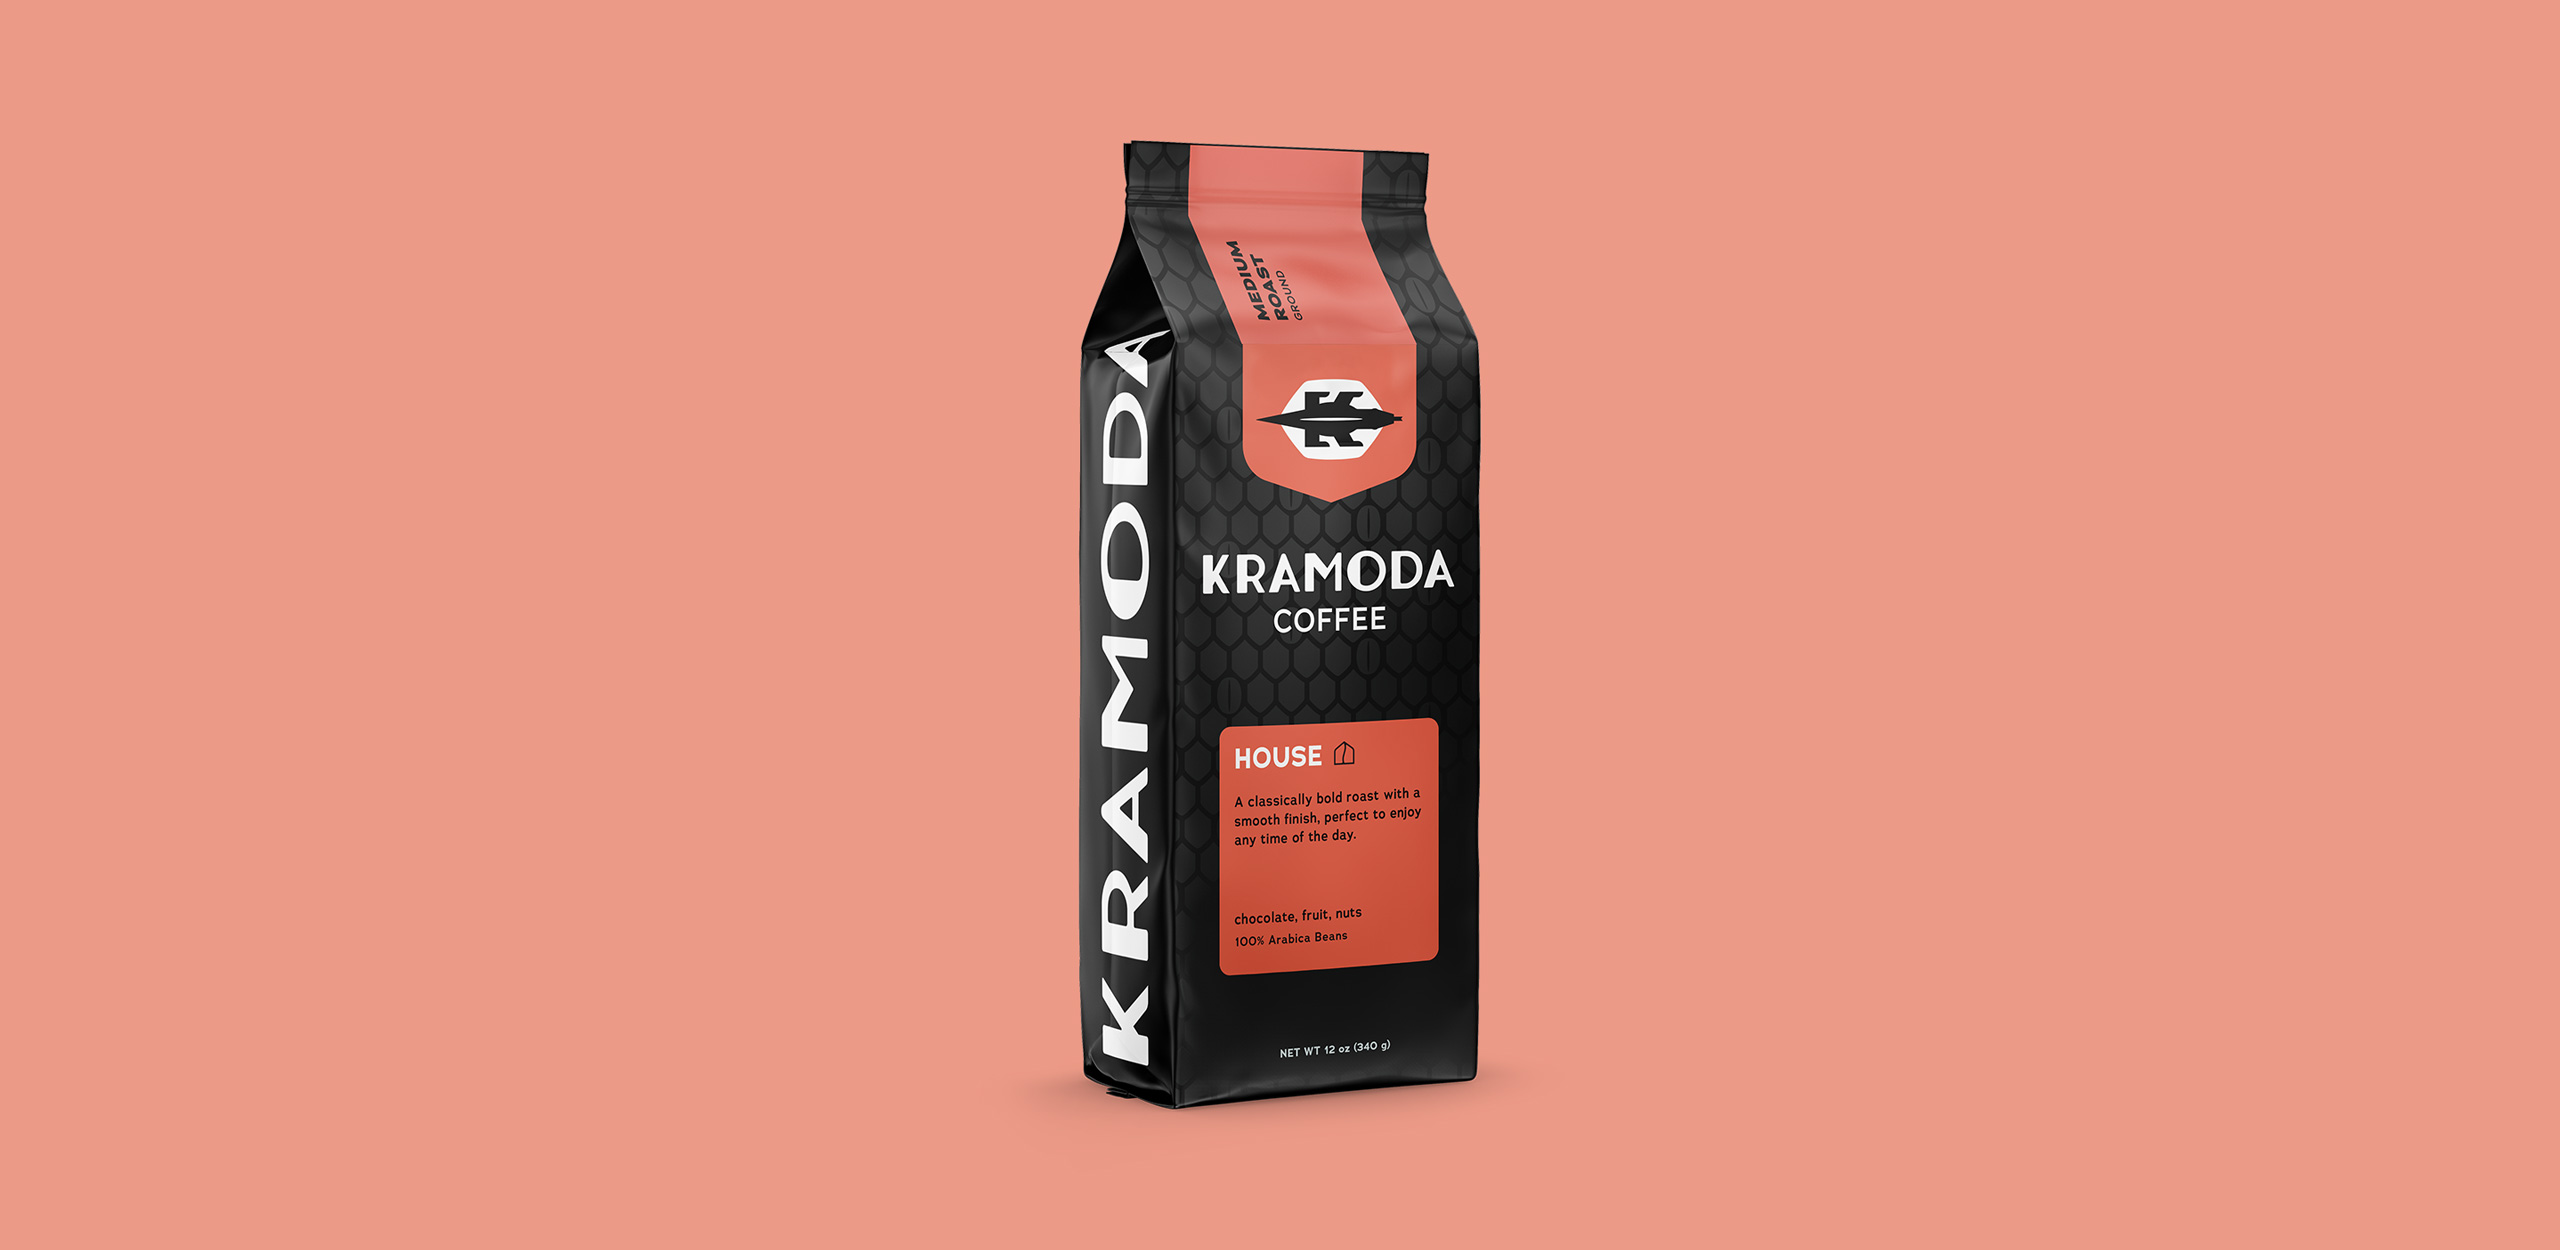 package of kramoda brand gourmet coffee on a skin color background